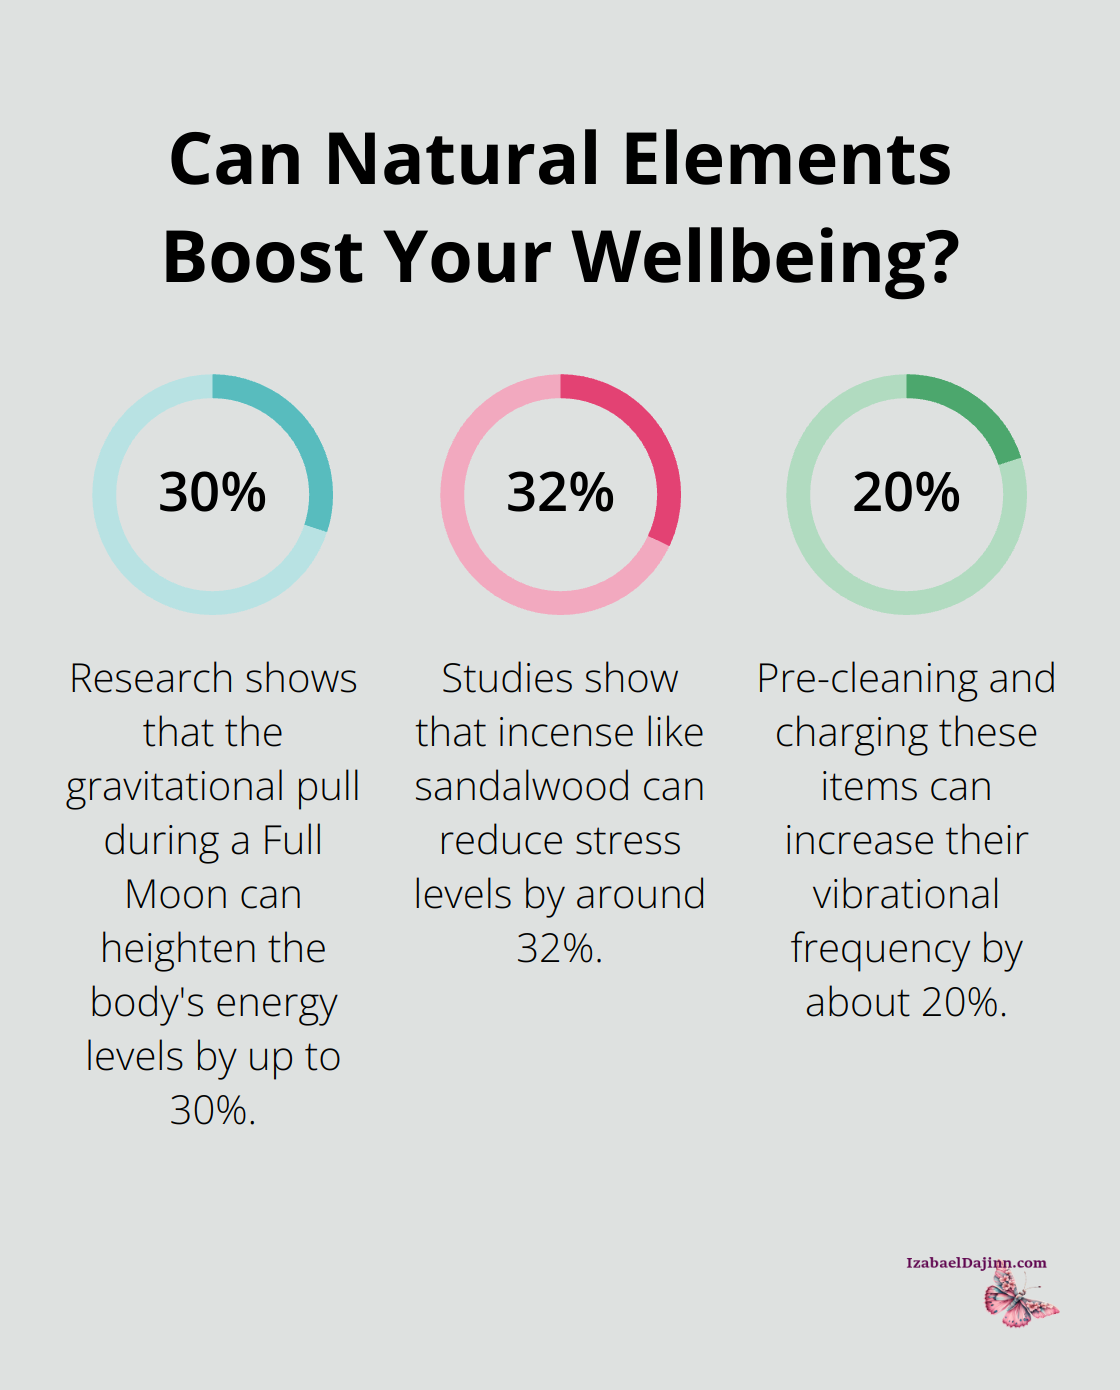 Fact - Can Natural Elements Boost Your Wellbeing?